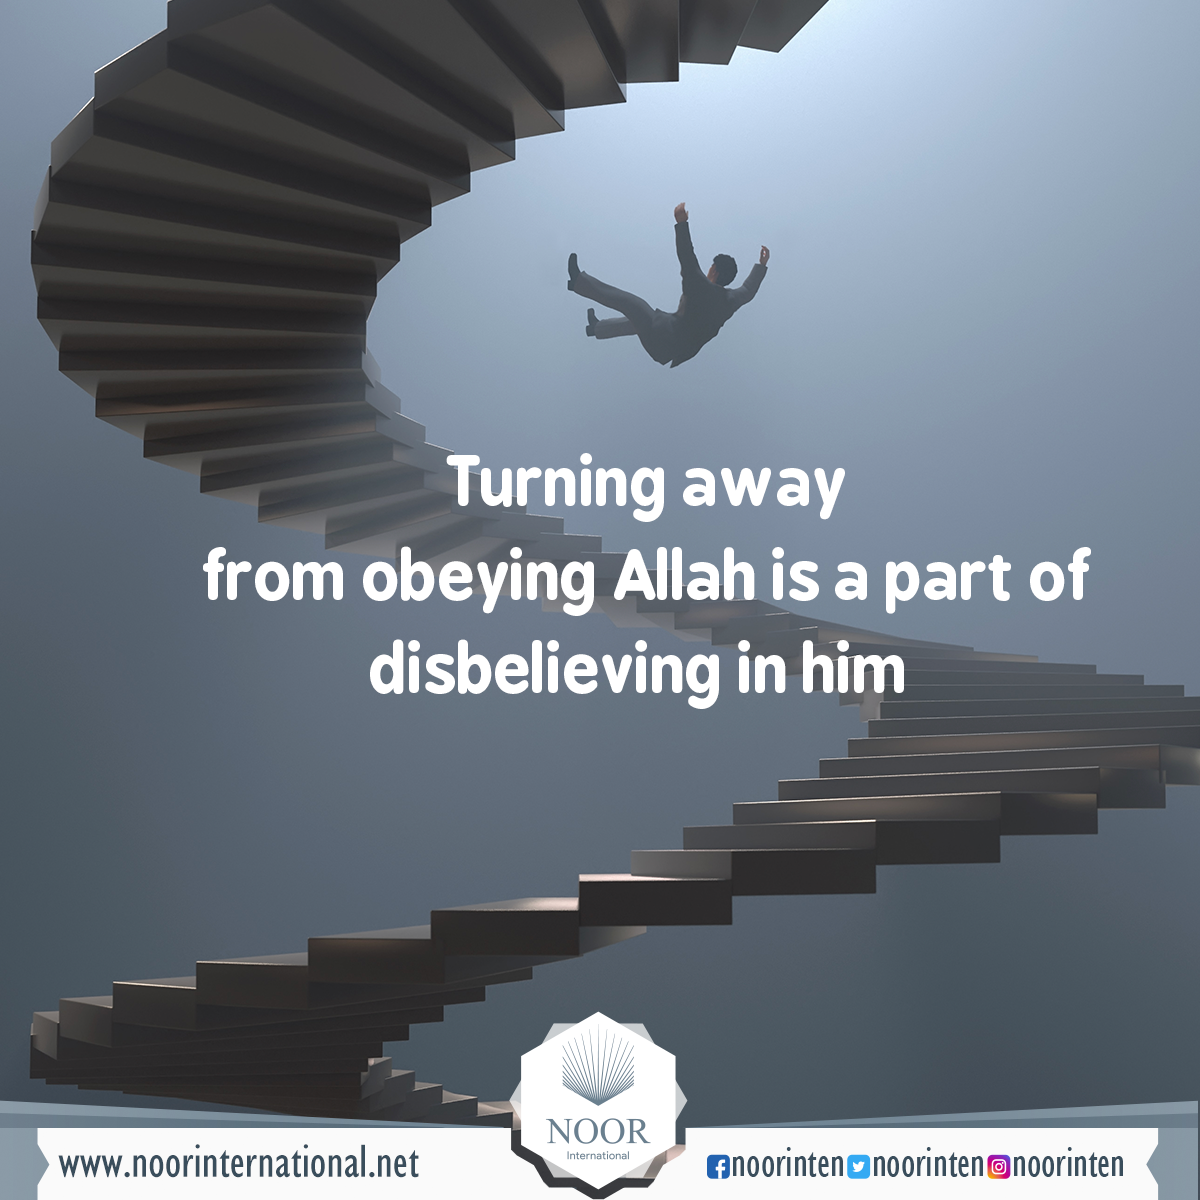 Turning away from obeying Allah is a part of disbelieving in him